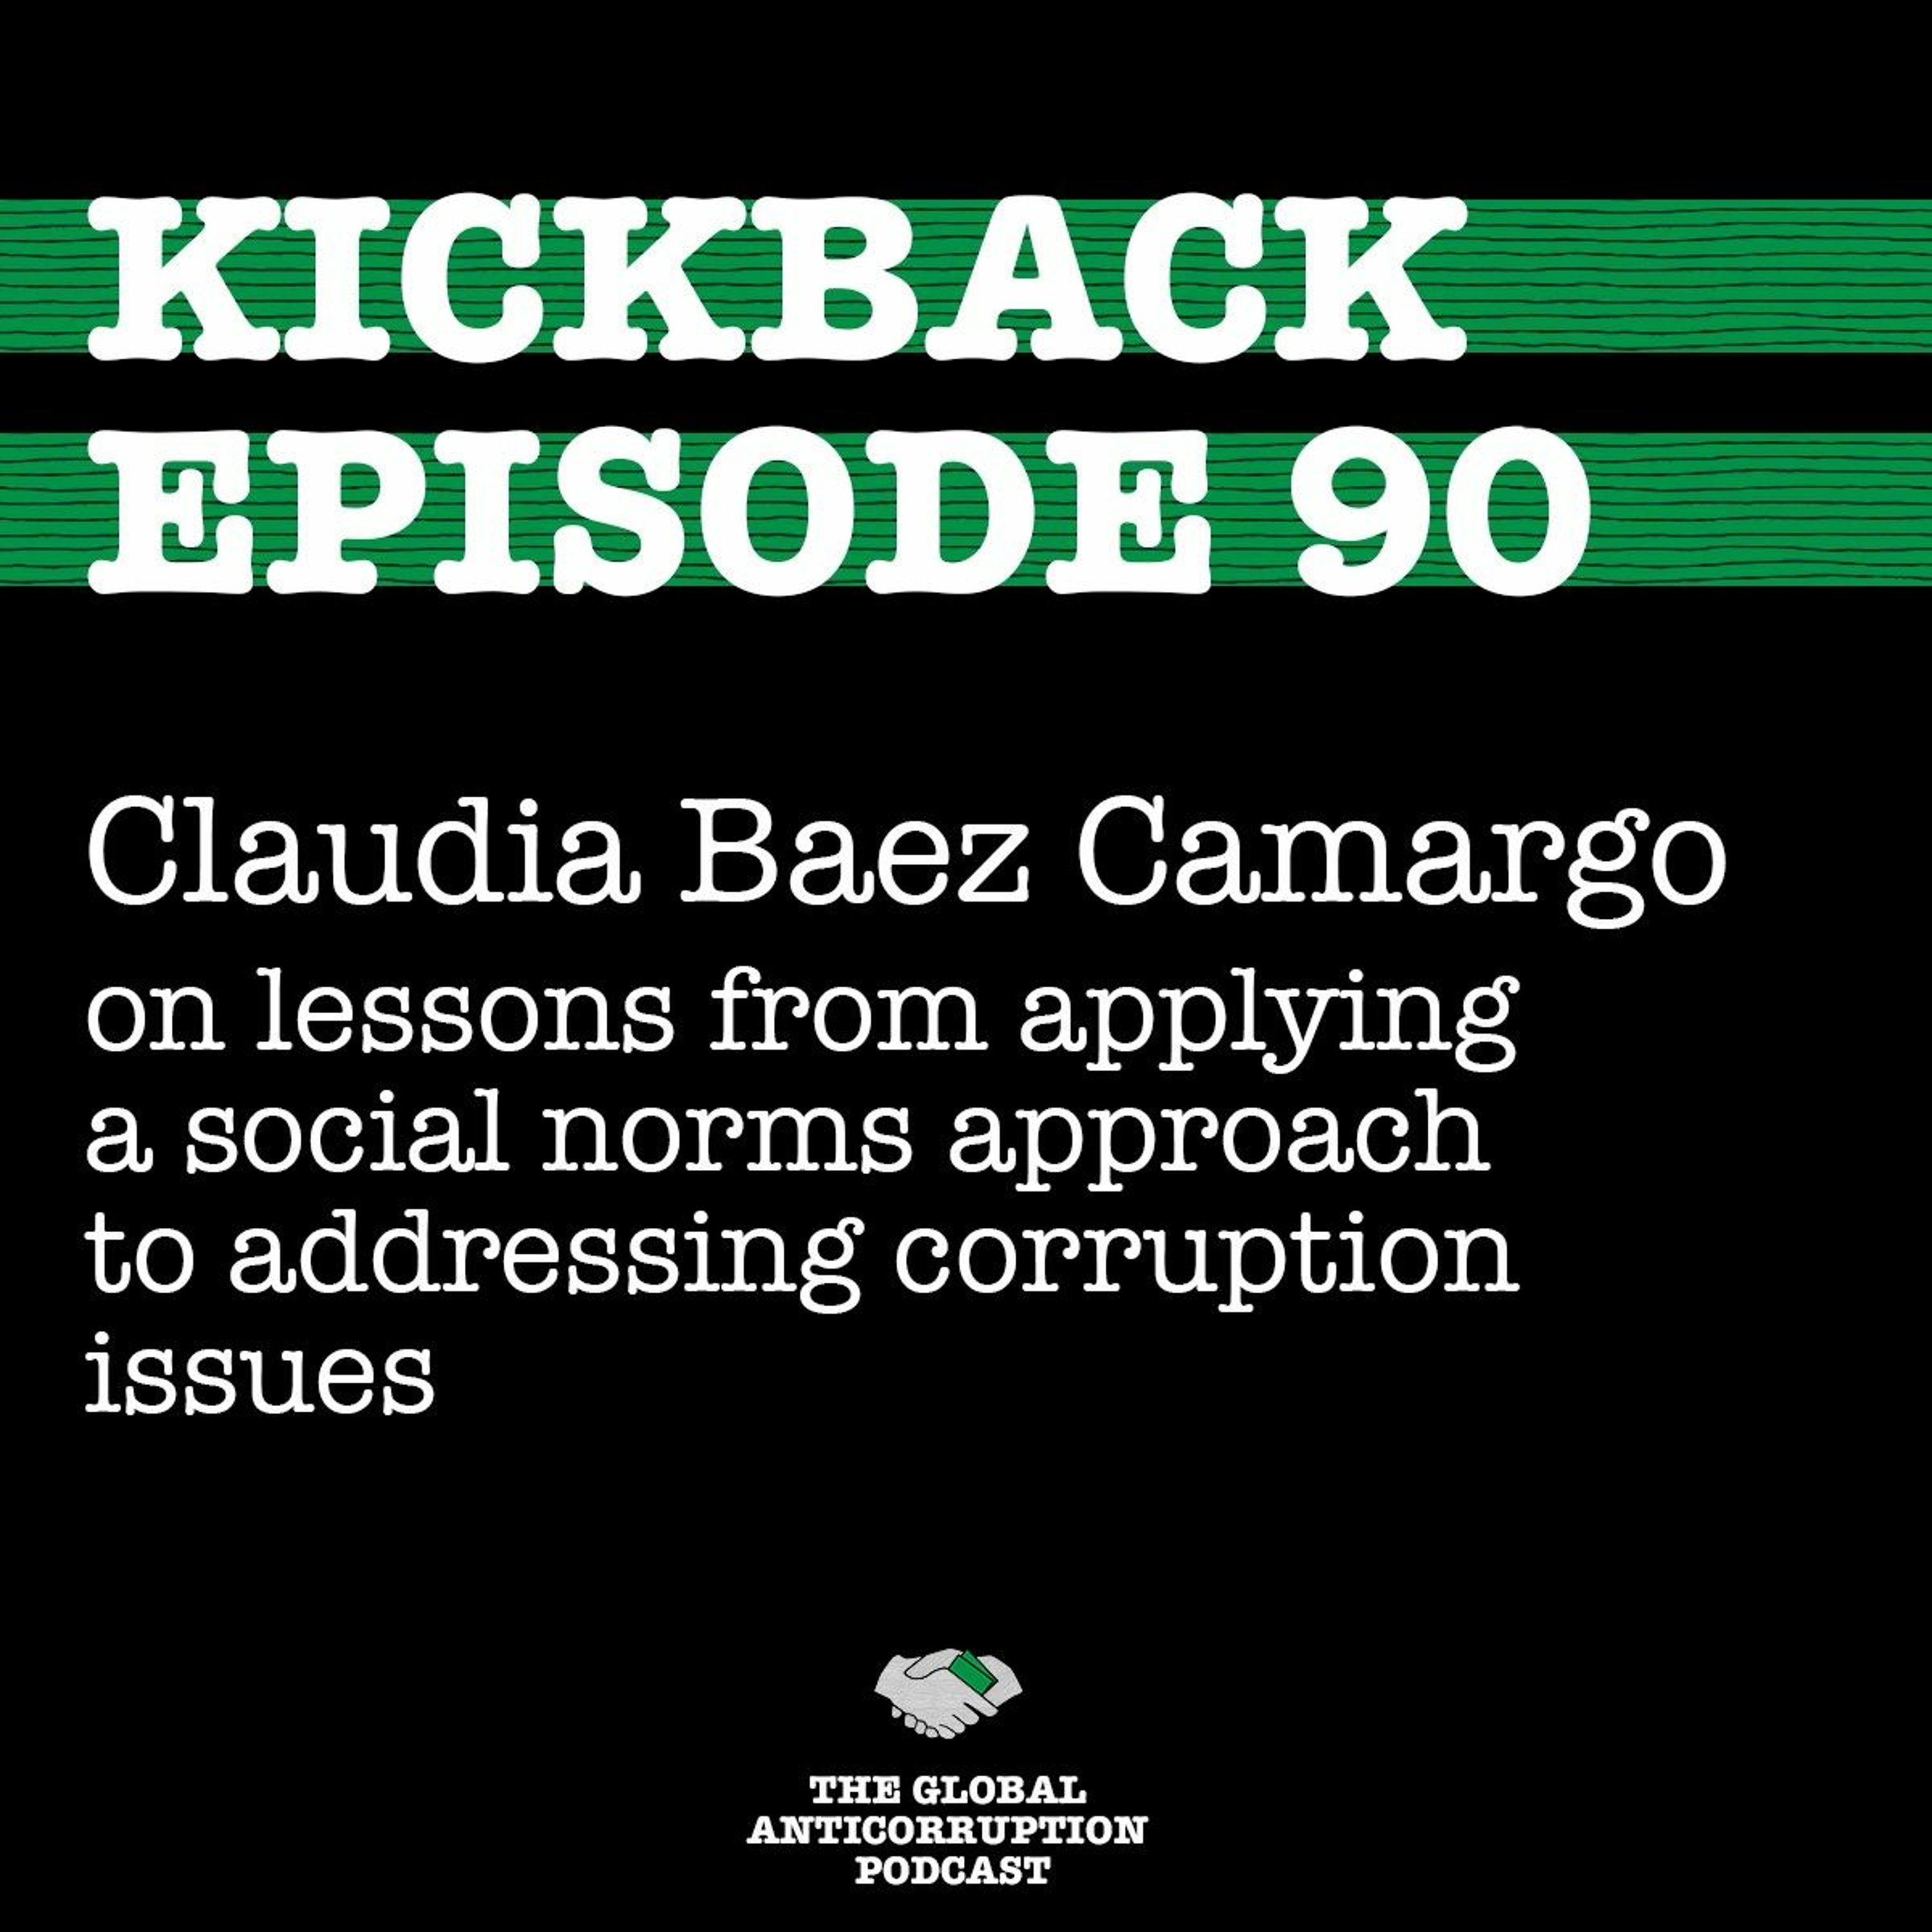 Episode 90. Claudia Baez Camargo on lessons from applying a social norms approach to corruption